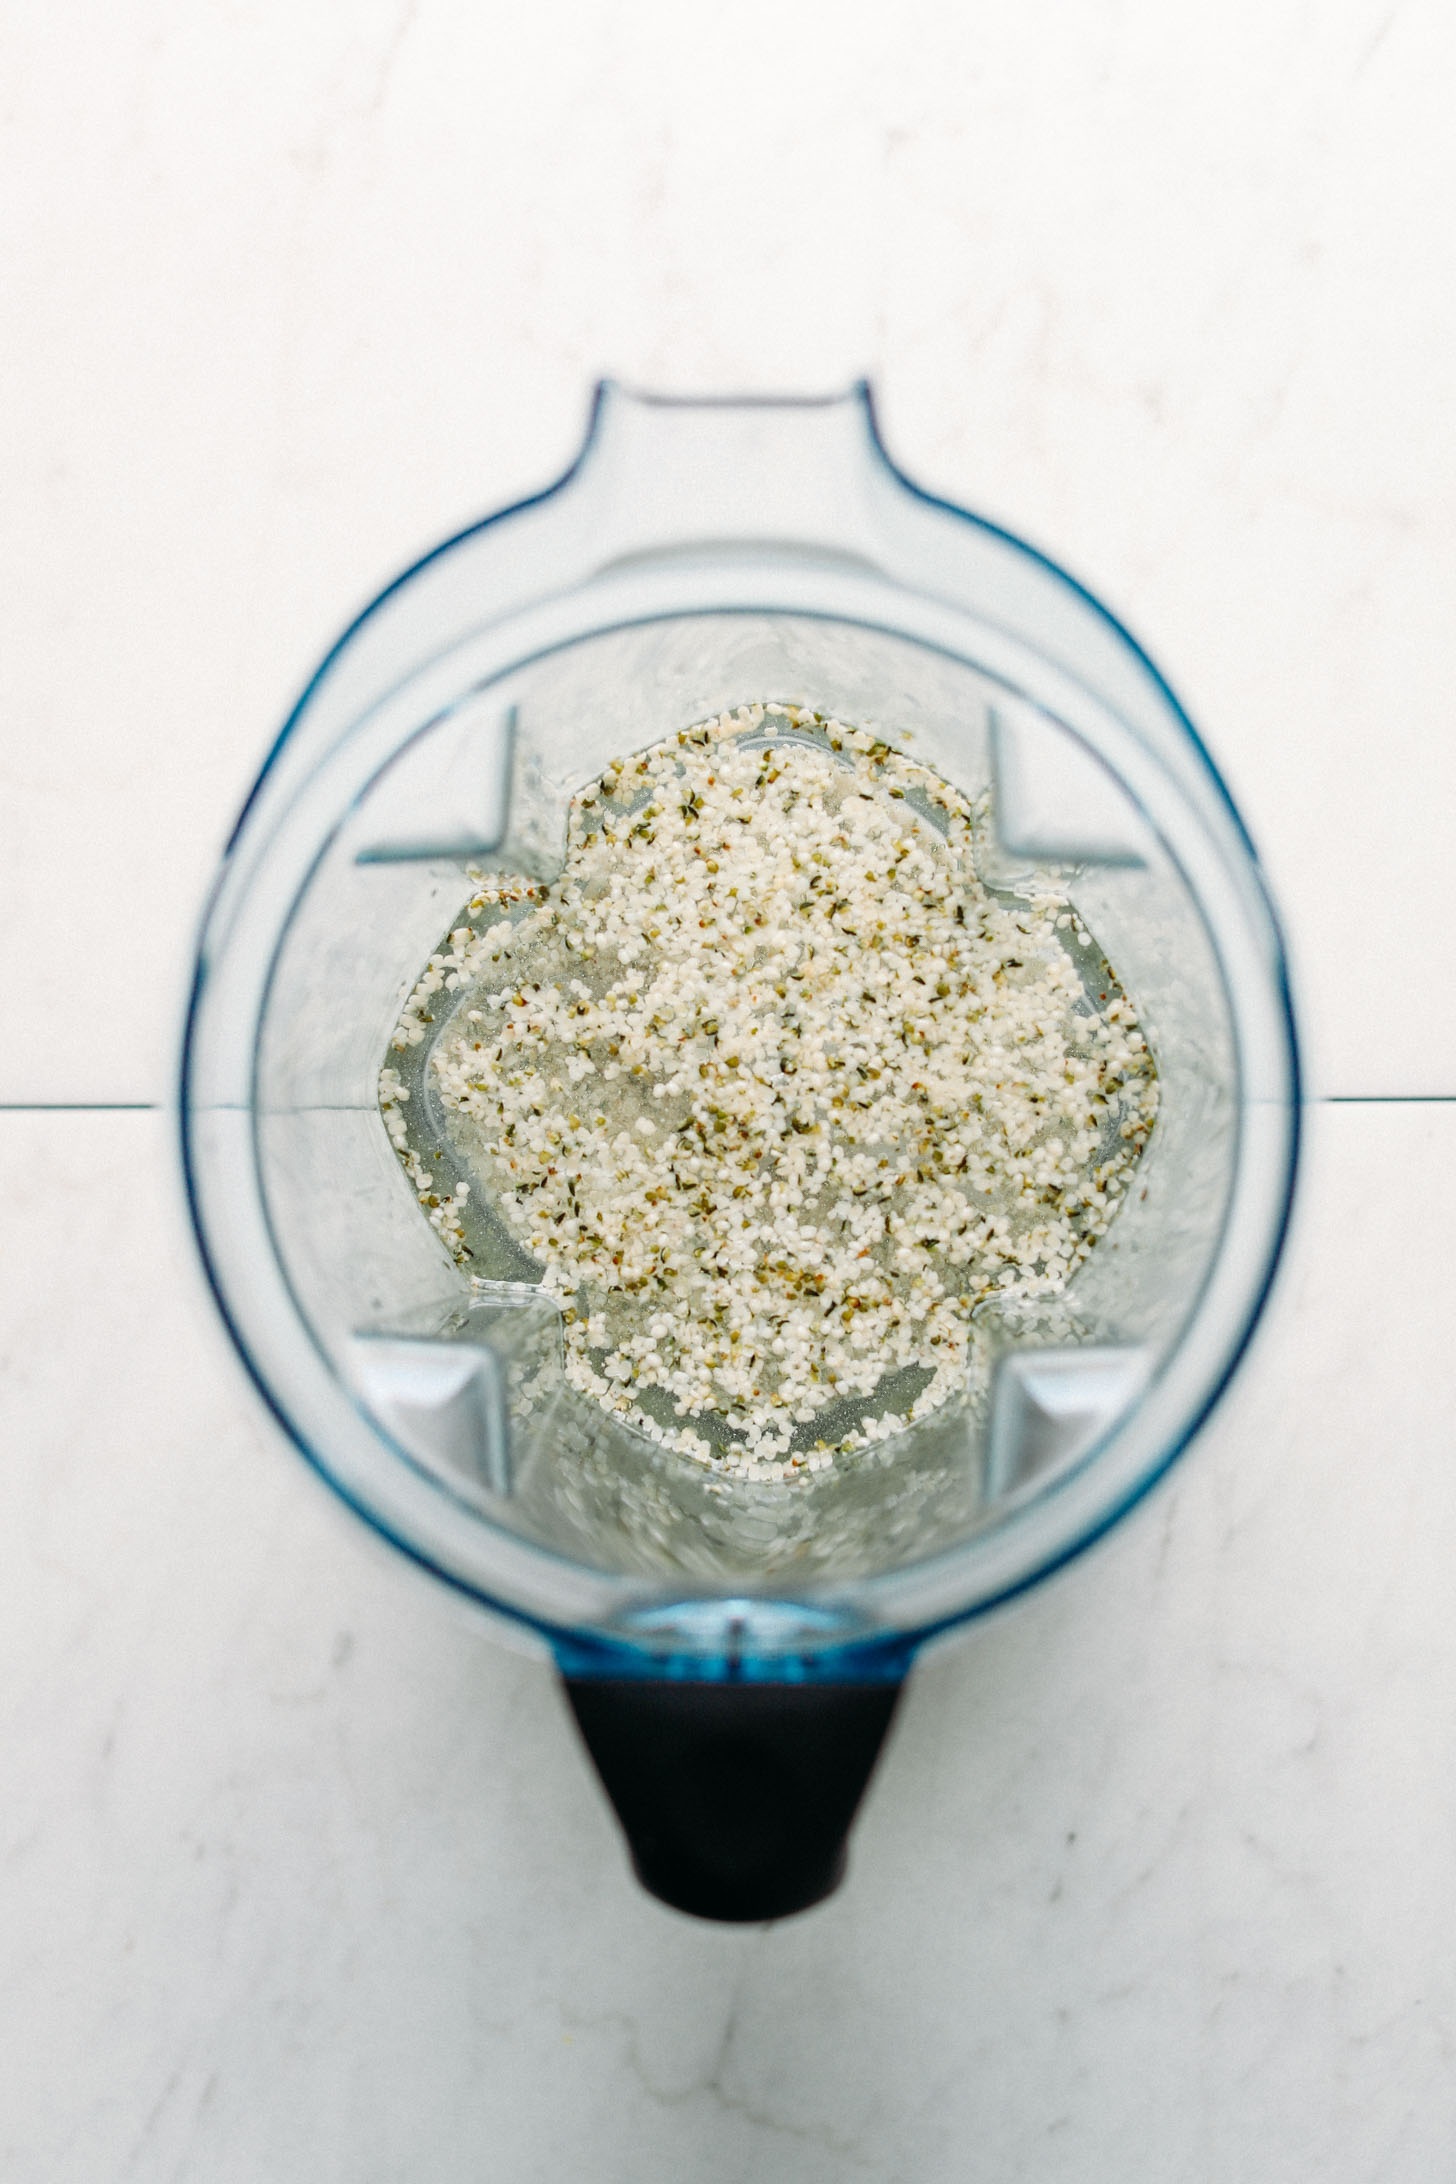 Blender with hemp seeds and other ingredients for making homemade hemp milk